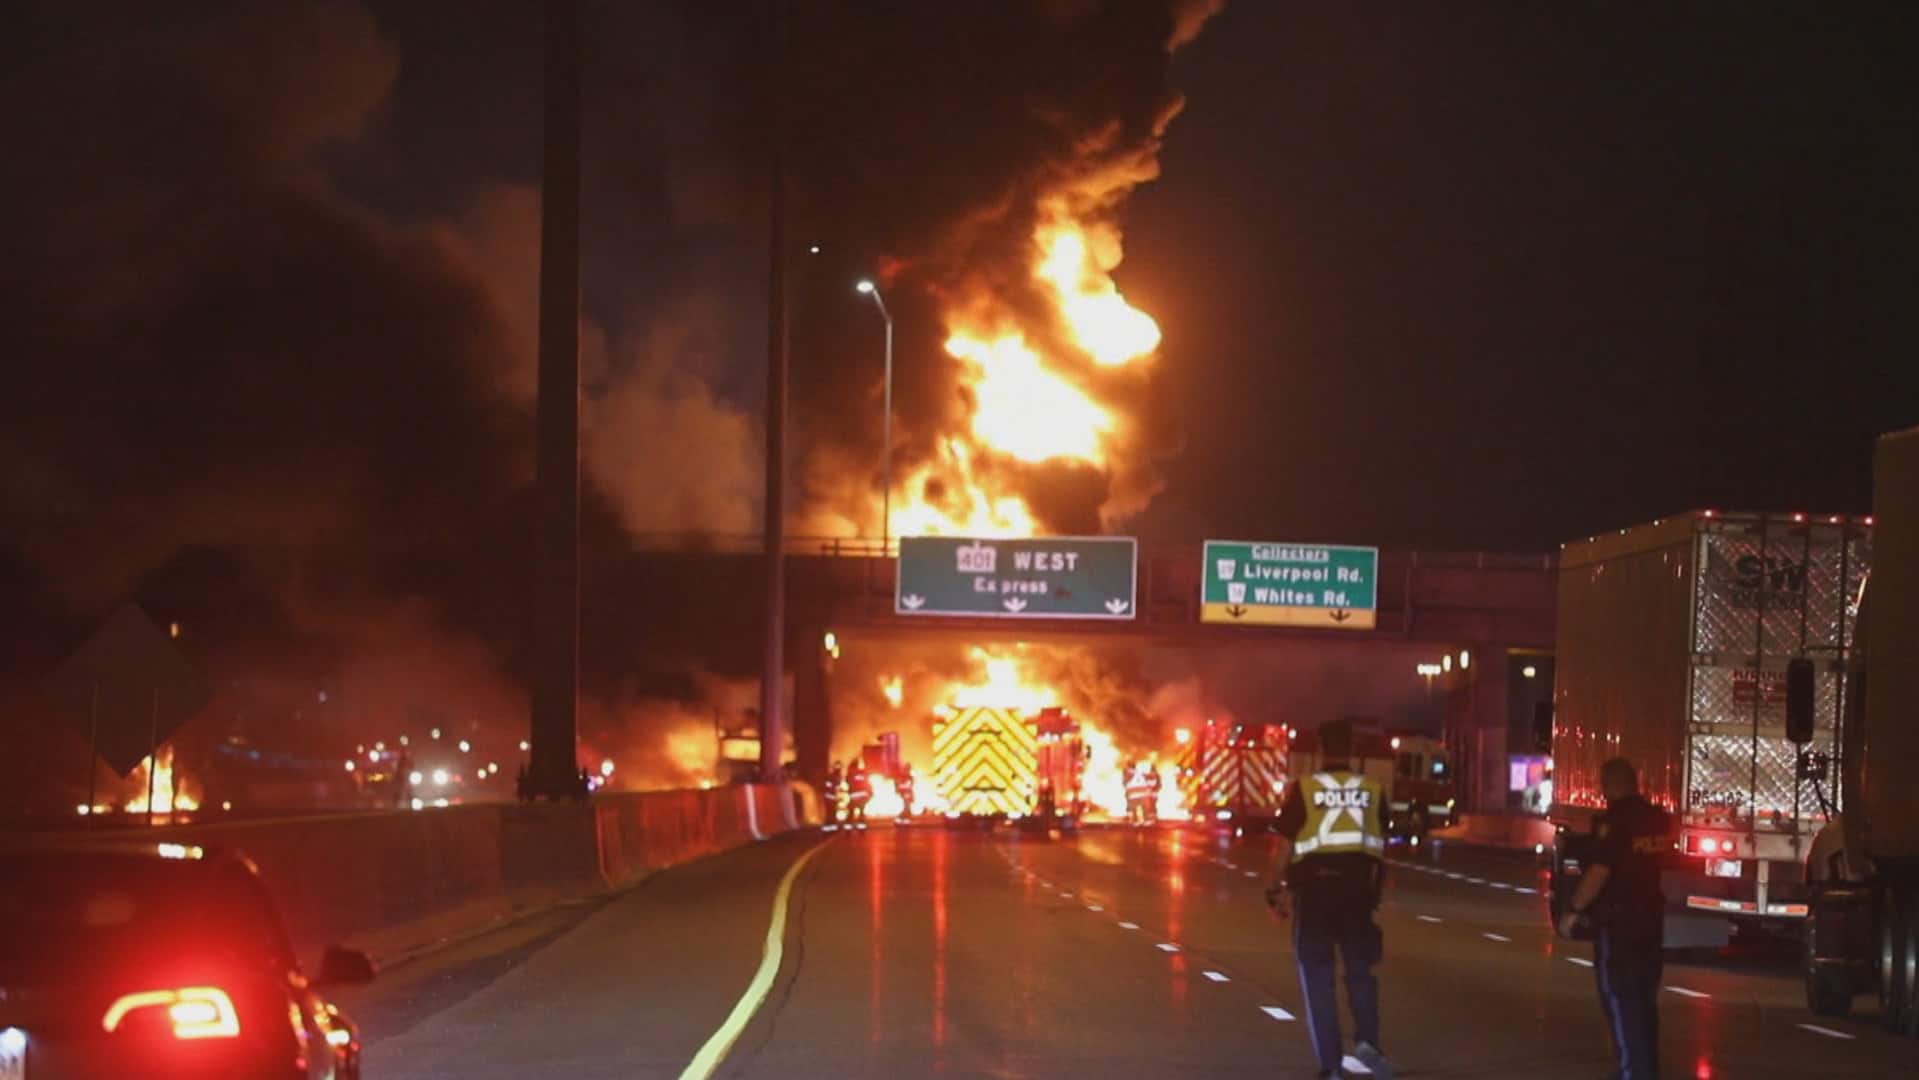 Stretch of Highway 401 closed in Pickering after fiery crash leaves at least 2 dead